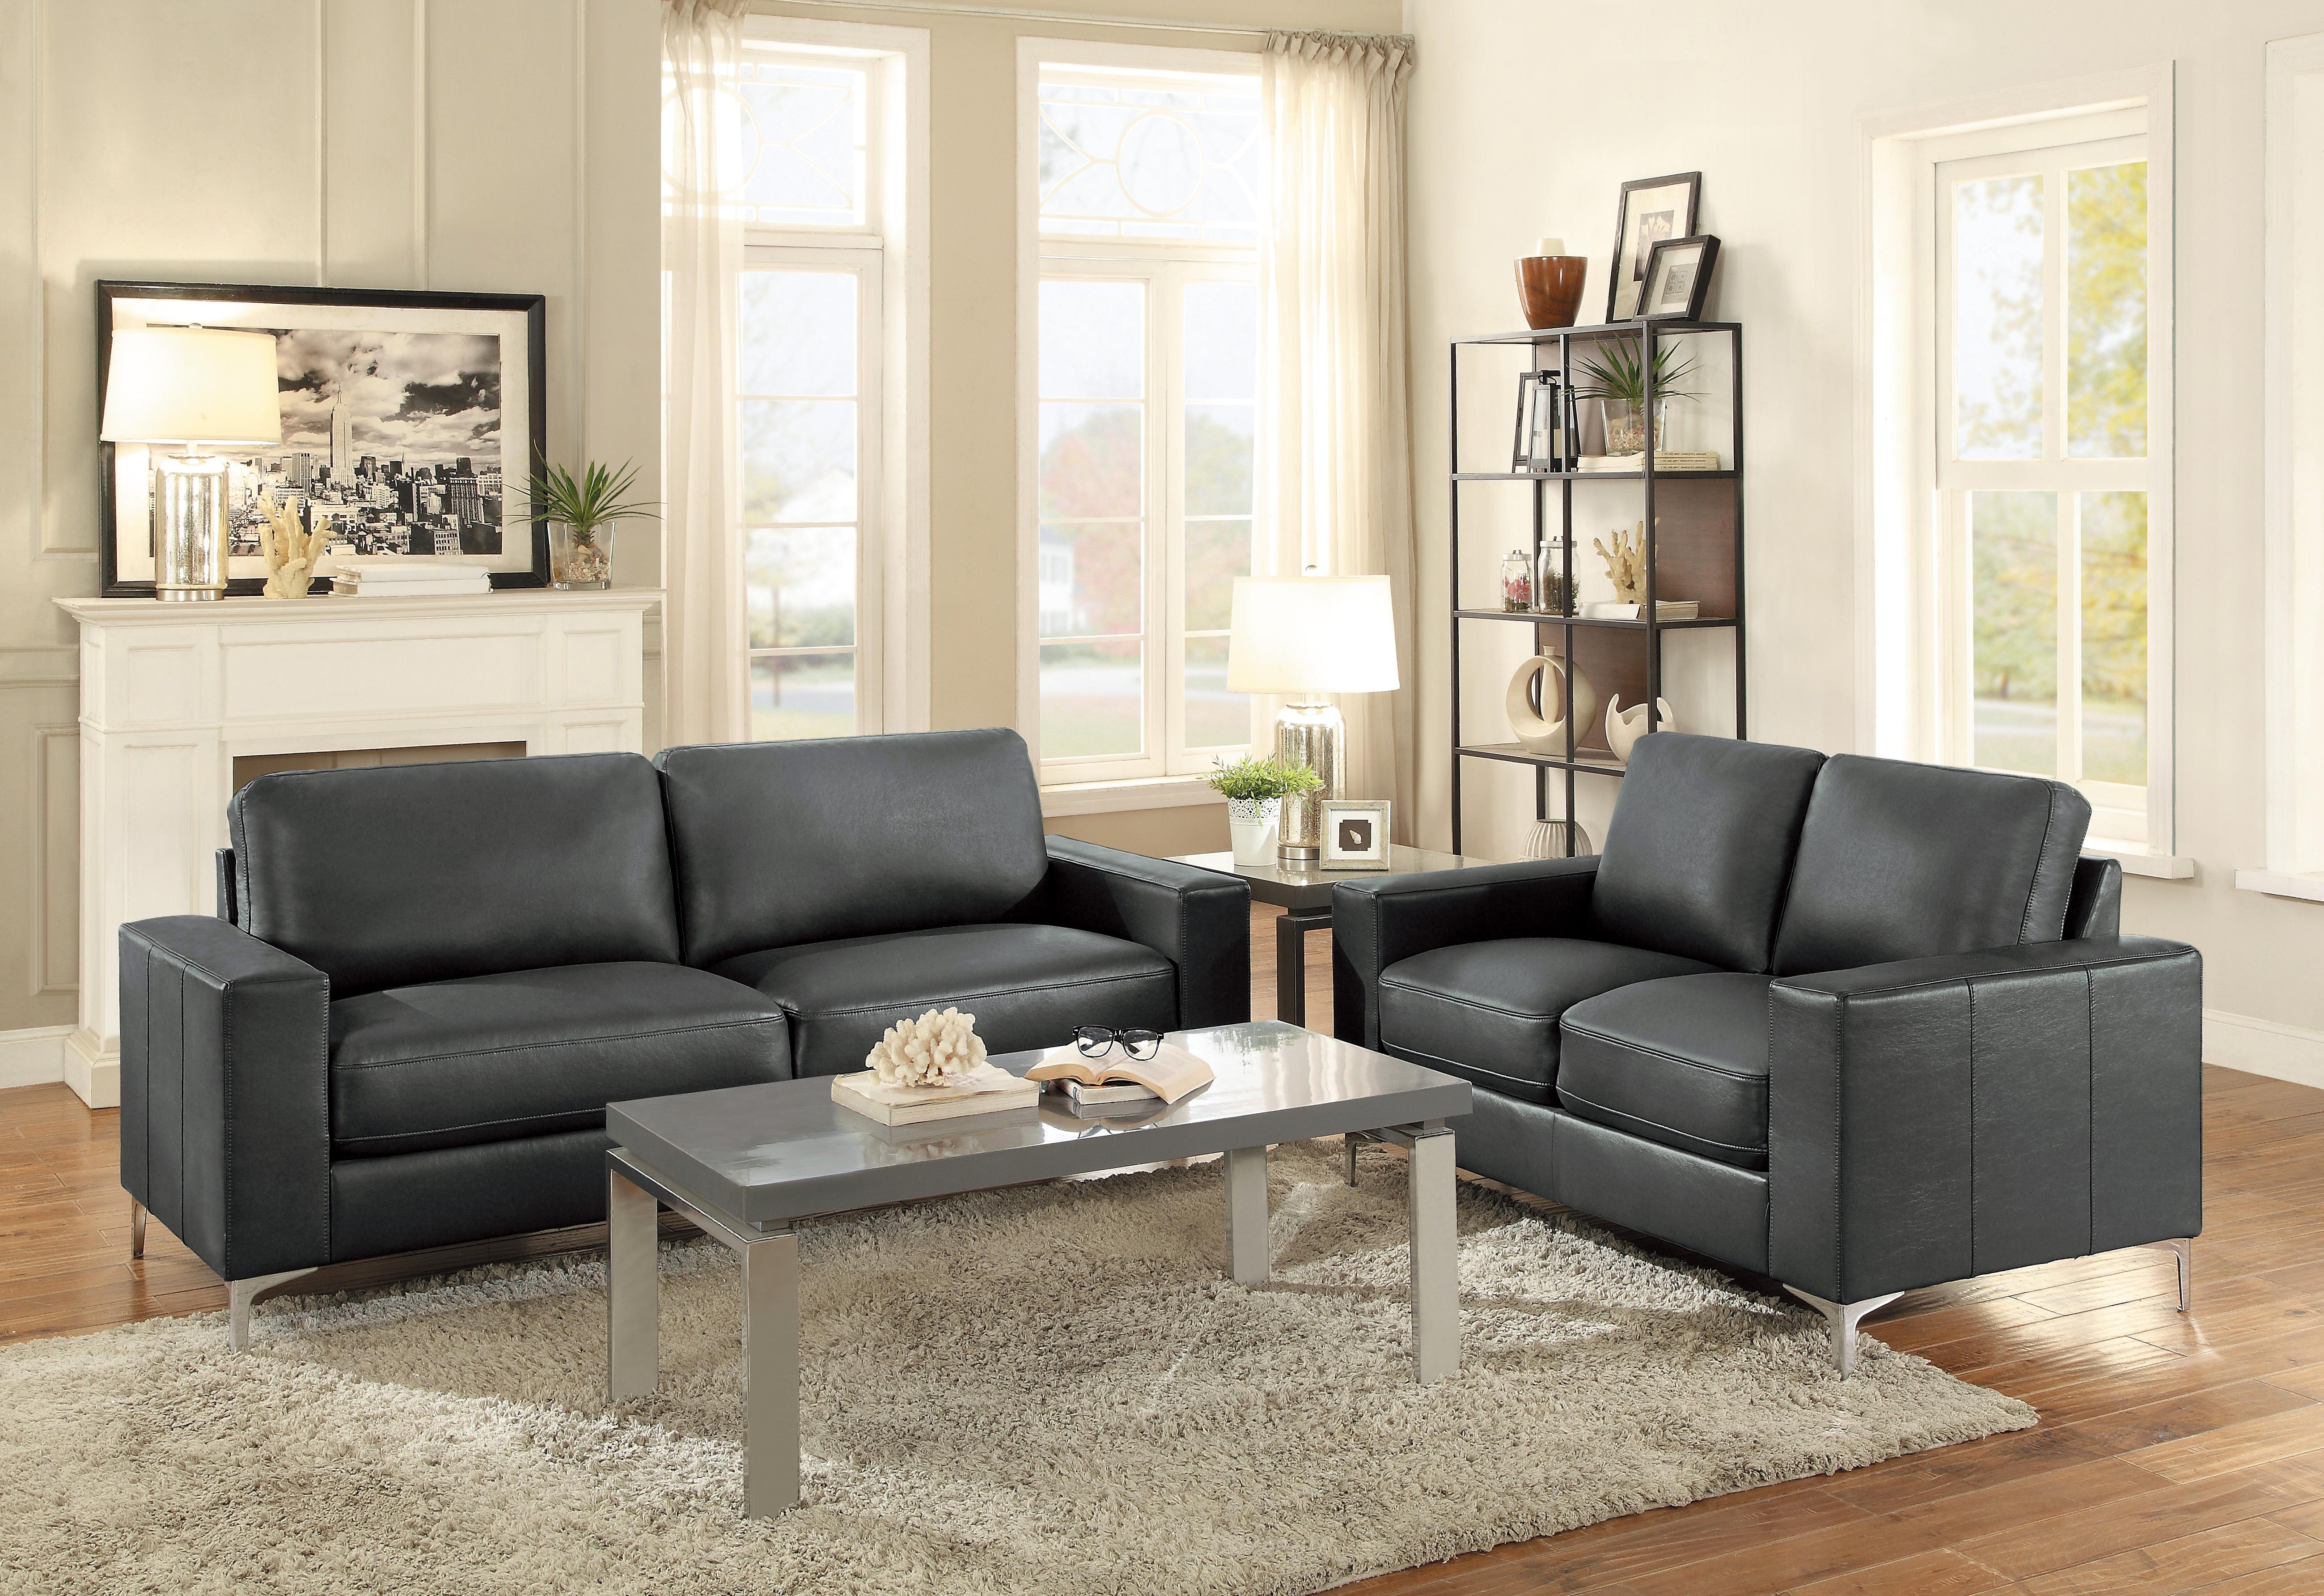 

    
Contemporary Gray Faux Leather Living Room Set 2pcs Homelegance 8203GY Iniko
